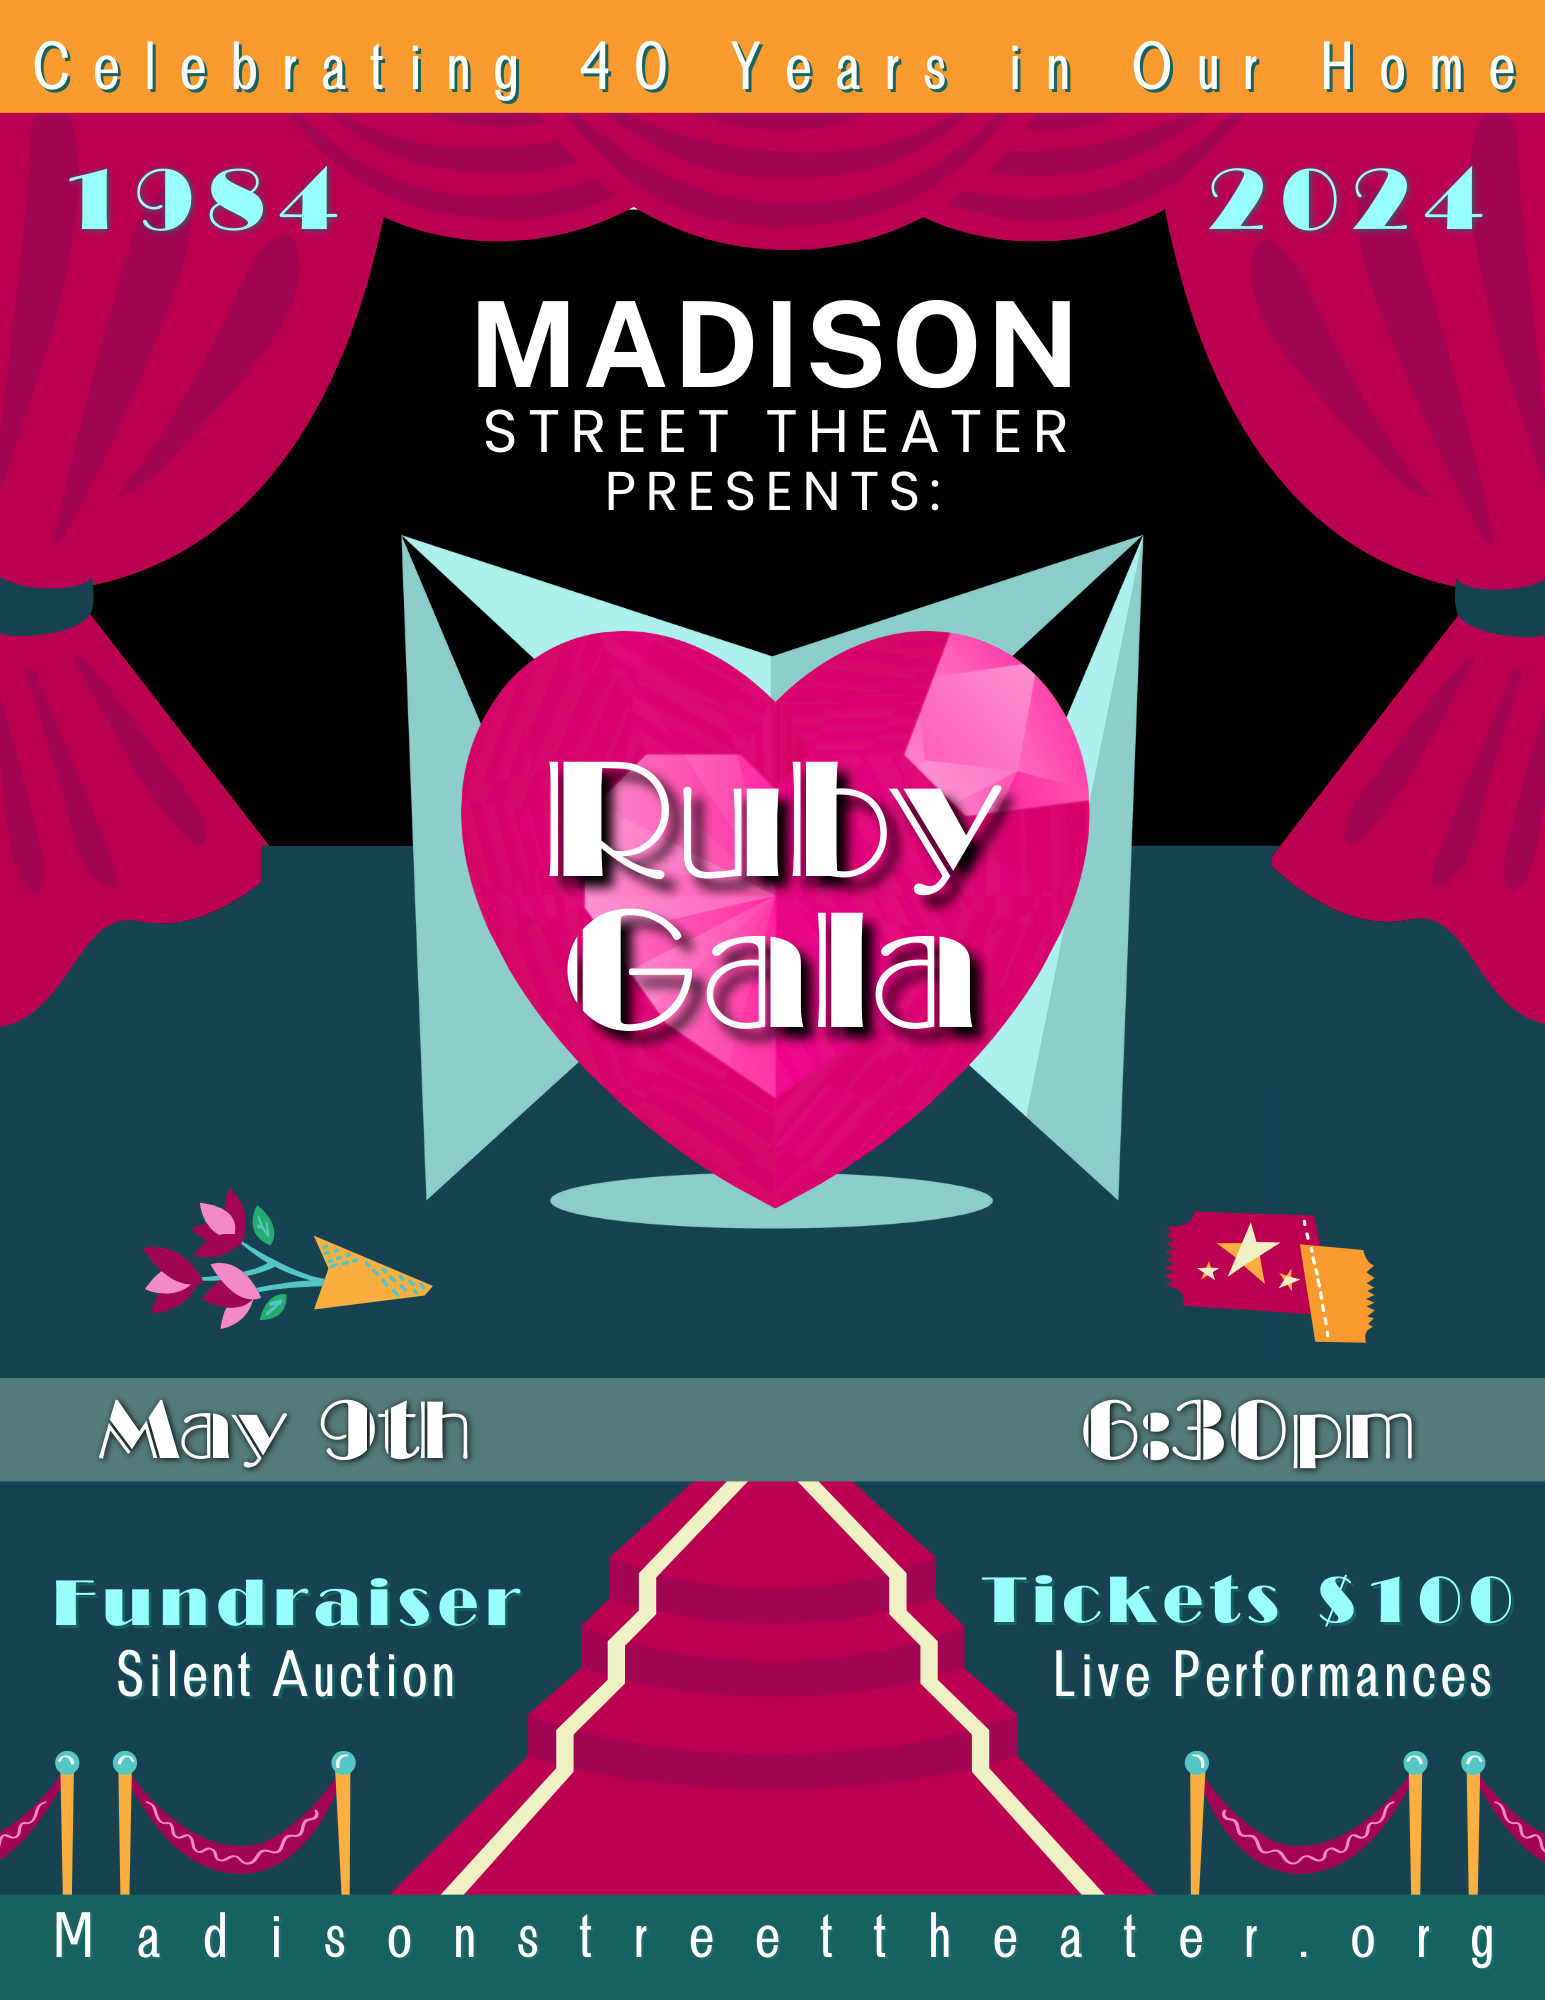 Celebrating 40 Years in Oak Park 1984-2024 Madison Street Theater presents: Ruby Gala May 9th 6:30pm Fundraiser Tickets $100 Madisonstreettheater.org